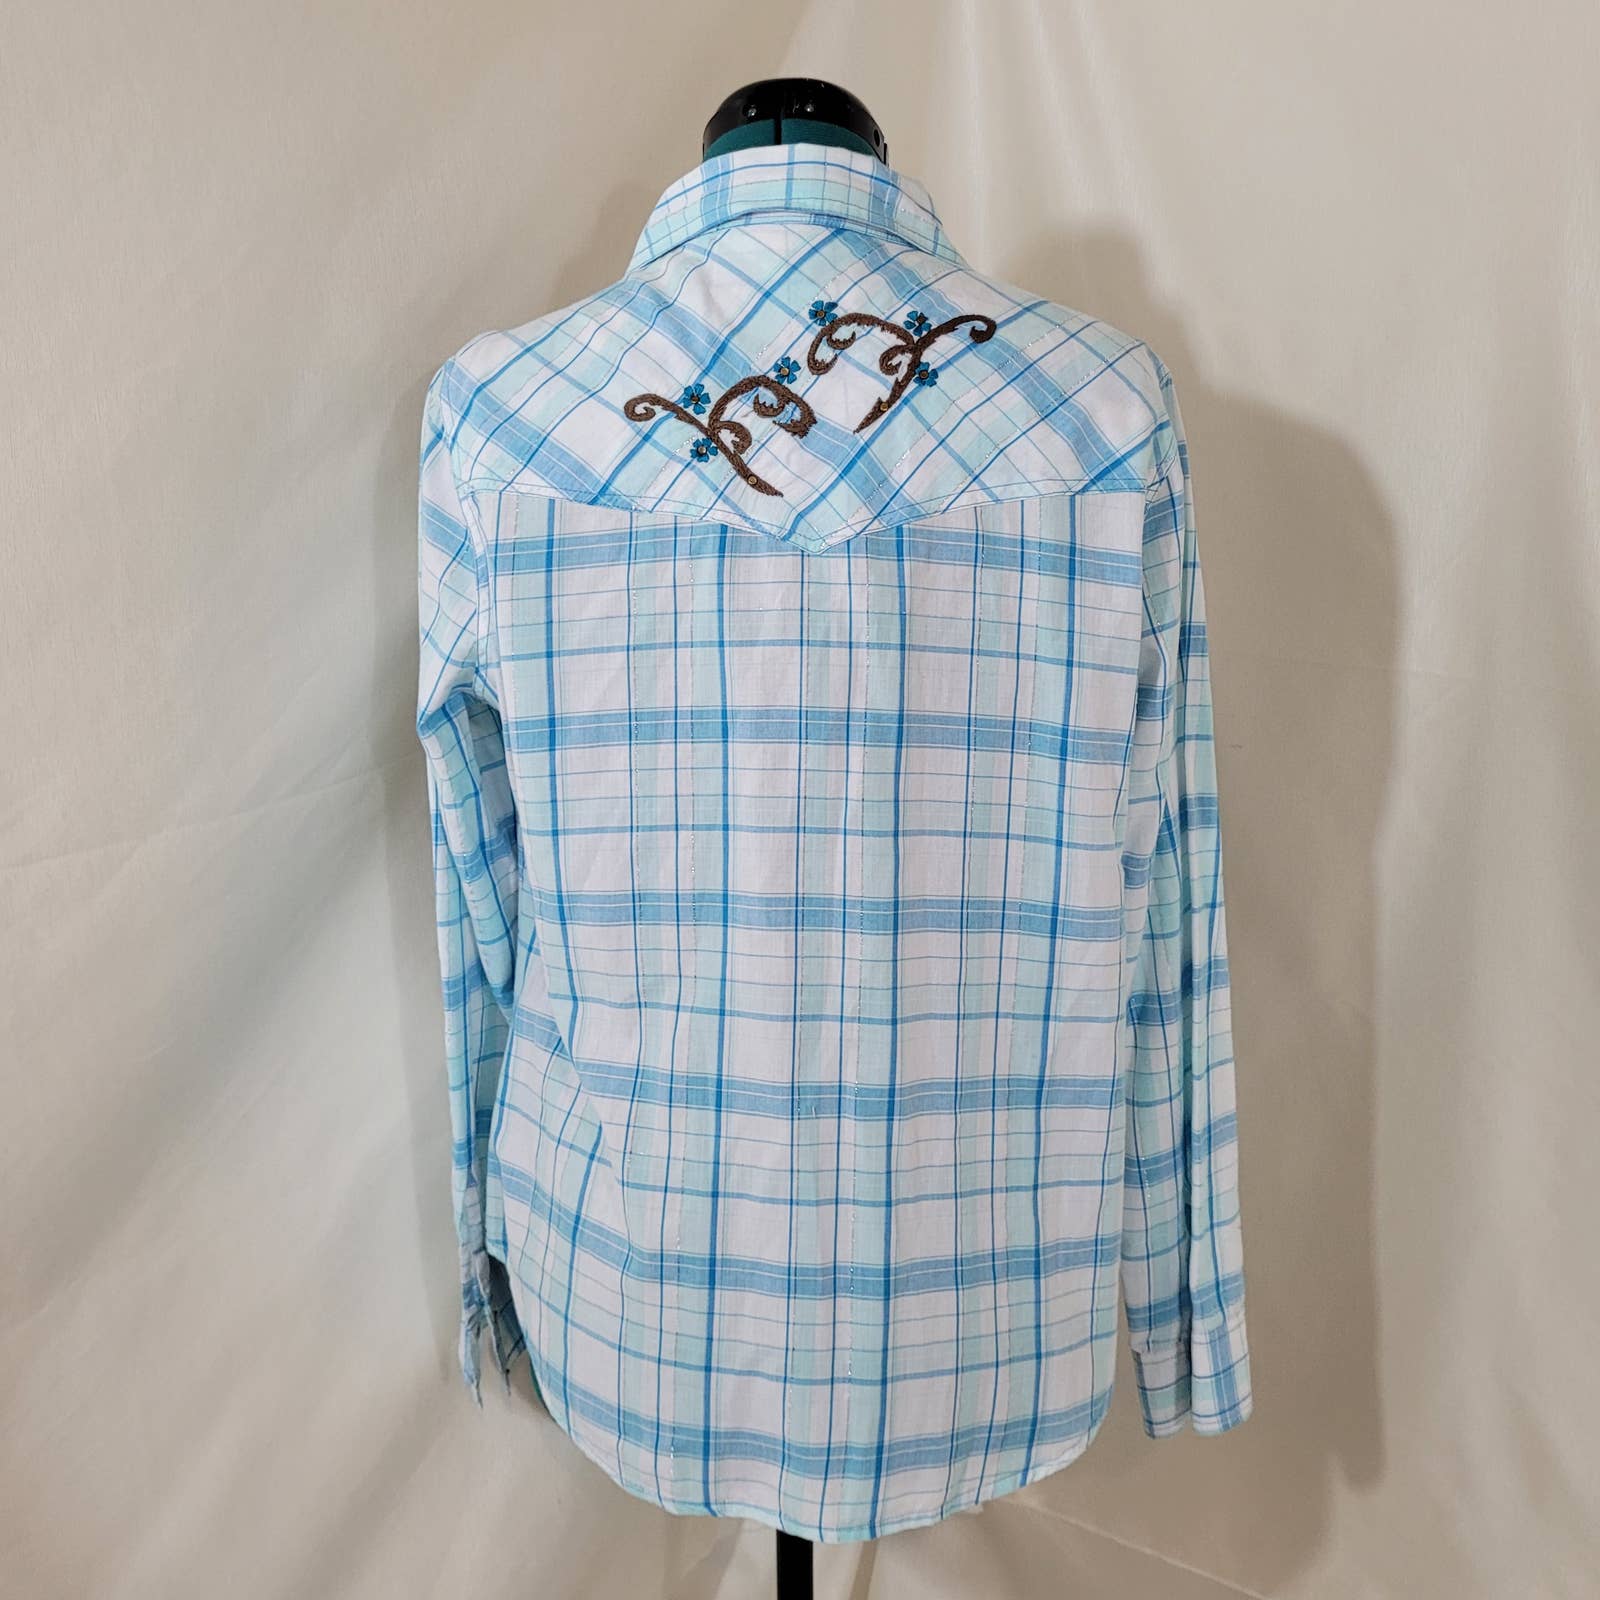 Cumberland Outfitters Blue Plaid Cowboy Cowgirl Blouse - Size MediumMarkita's ClosetCumberland Outfitters